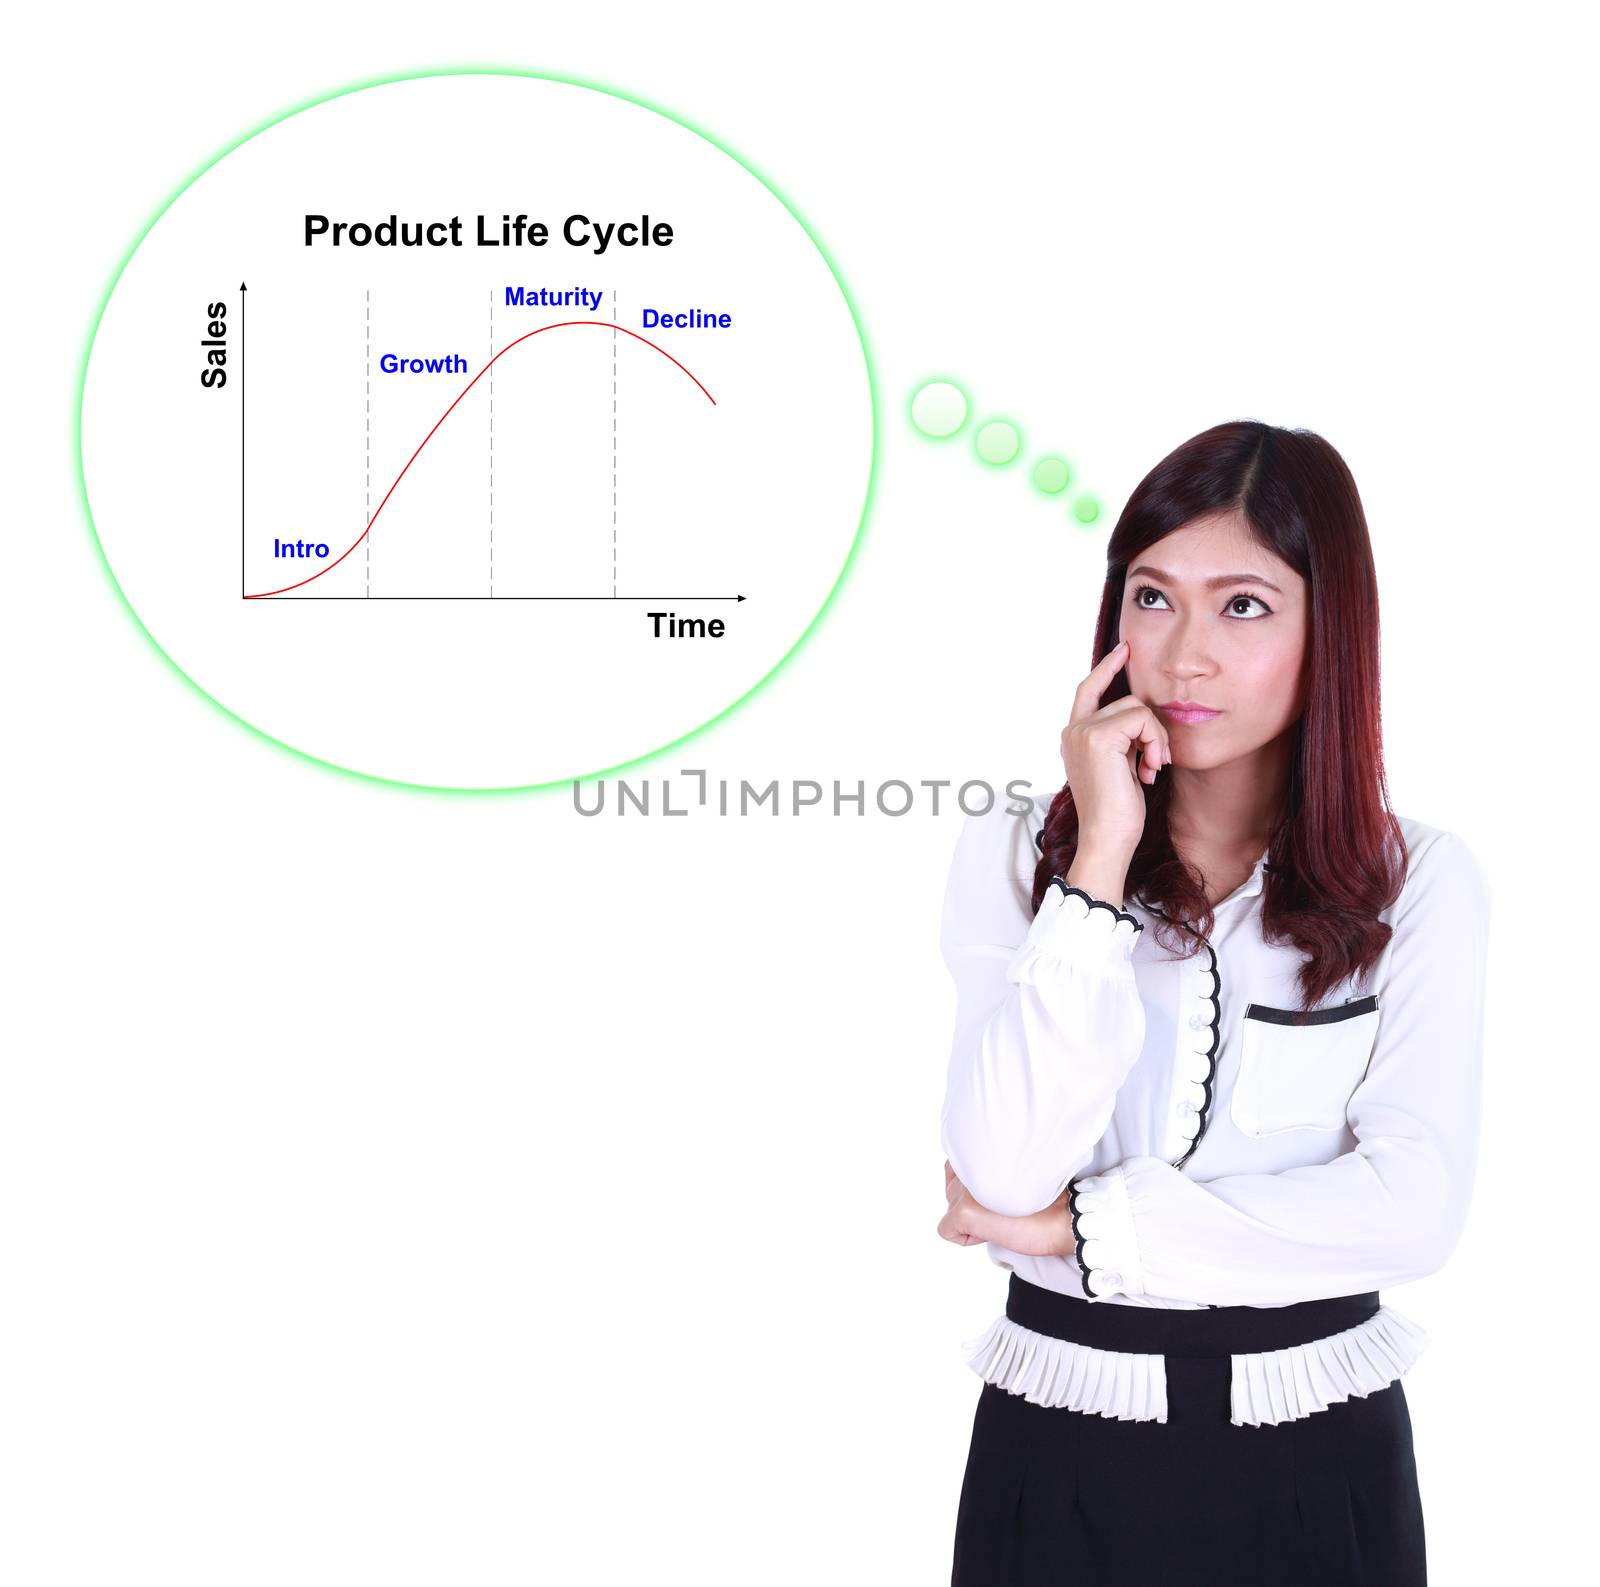 Business woman thinking about Product Life Cycle (PLC) by geargodz